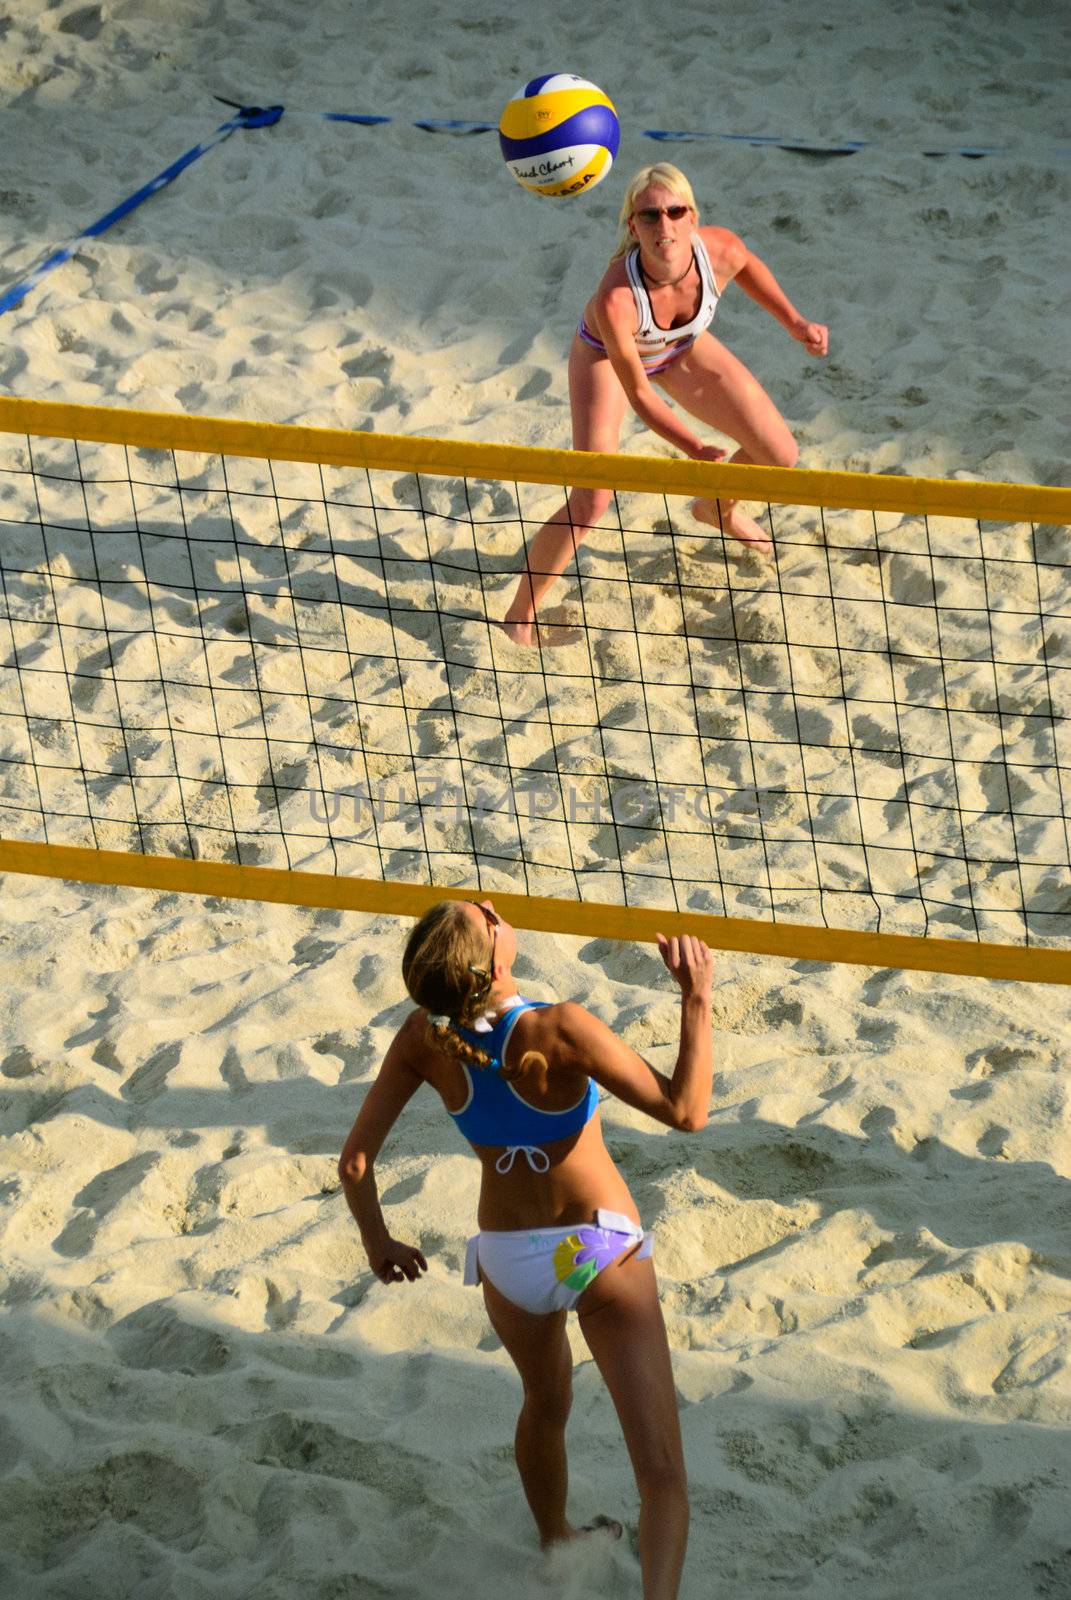 ZELL AM SEE, AUSTRIA - JUNE 26: Participants at the Beach City 2010 center court, the biggest amateur Beach Volleyball Tournament in Austria. June 26, 2010 in Zell am See, Austria